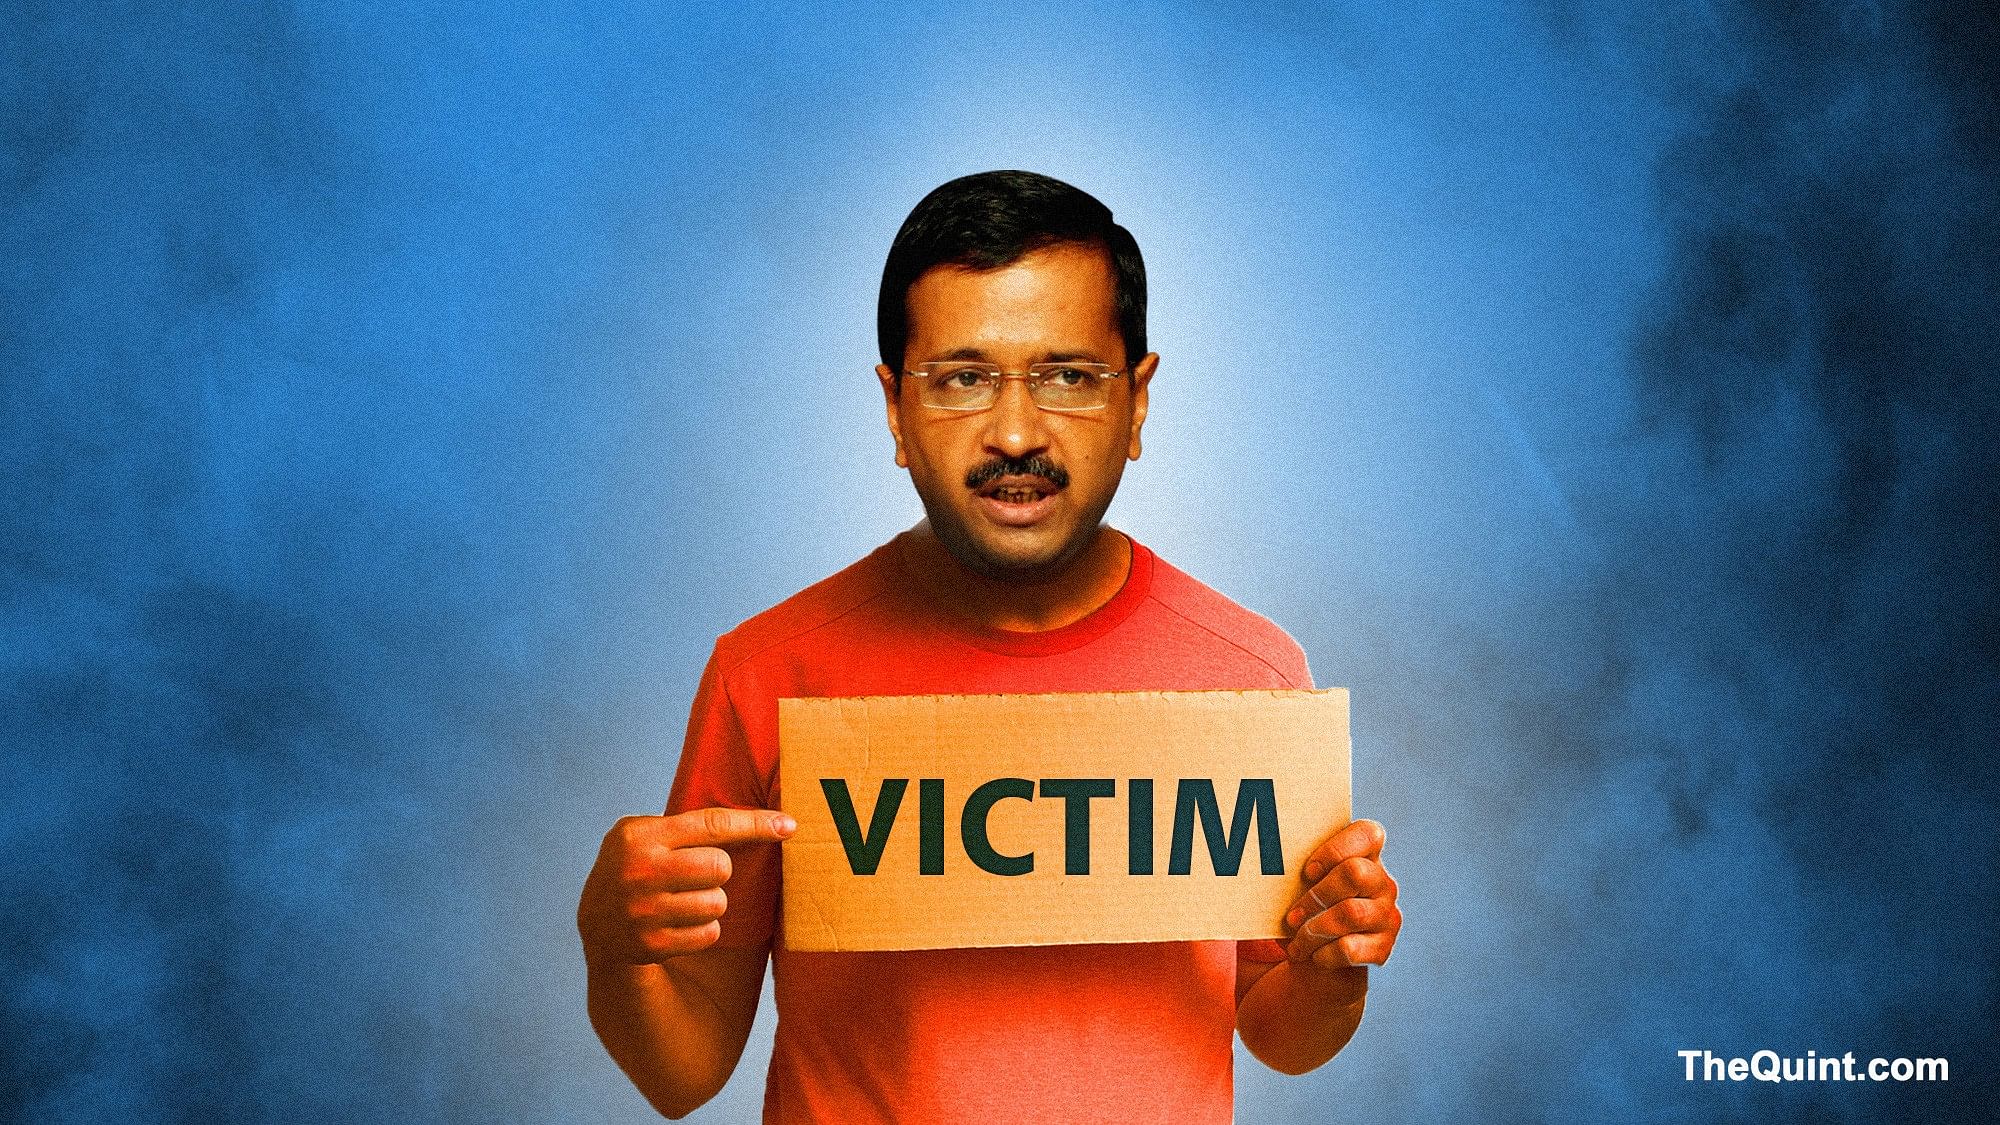 Is the victim card working for Arvind Kejriwal? The answer is a resounding NO.